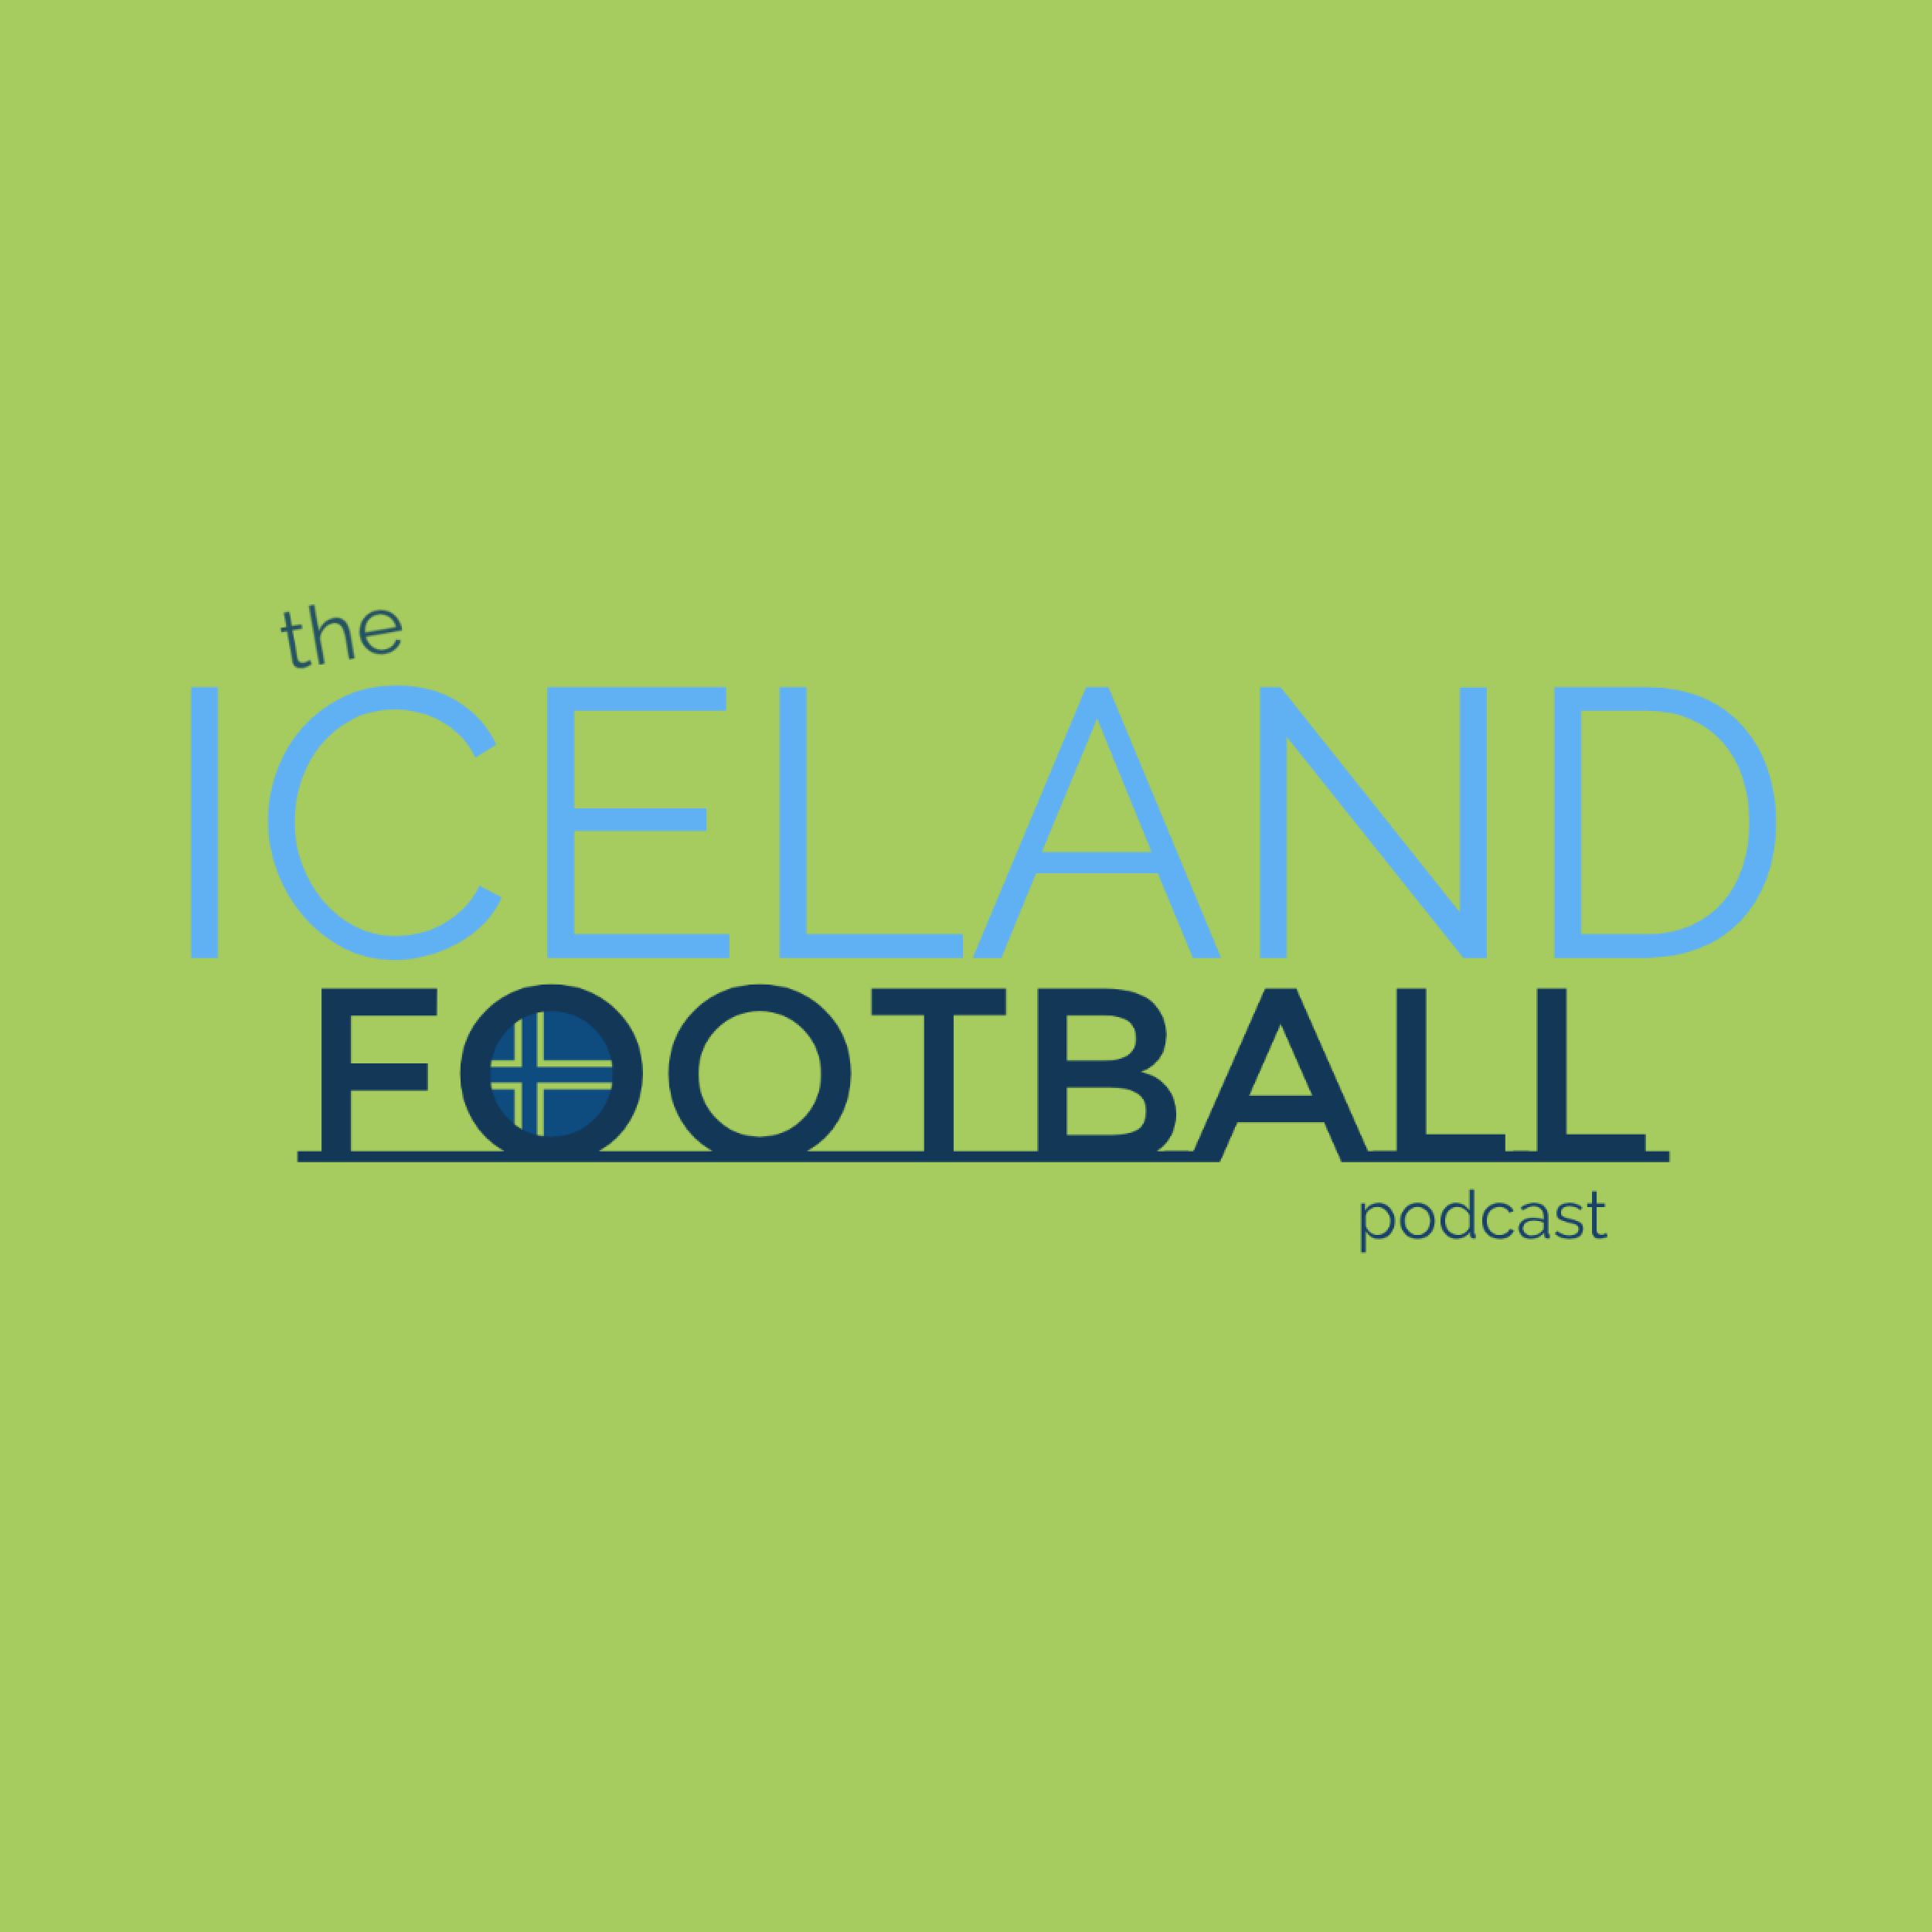 The Iceland Football Podcast